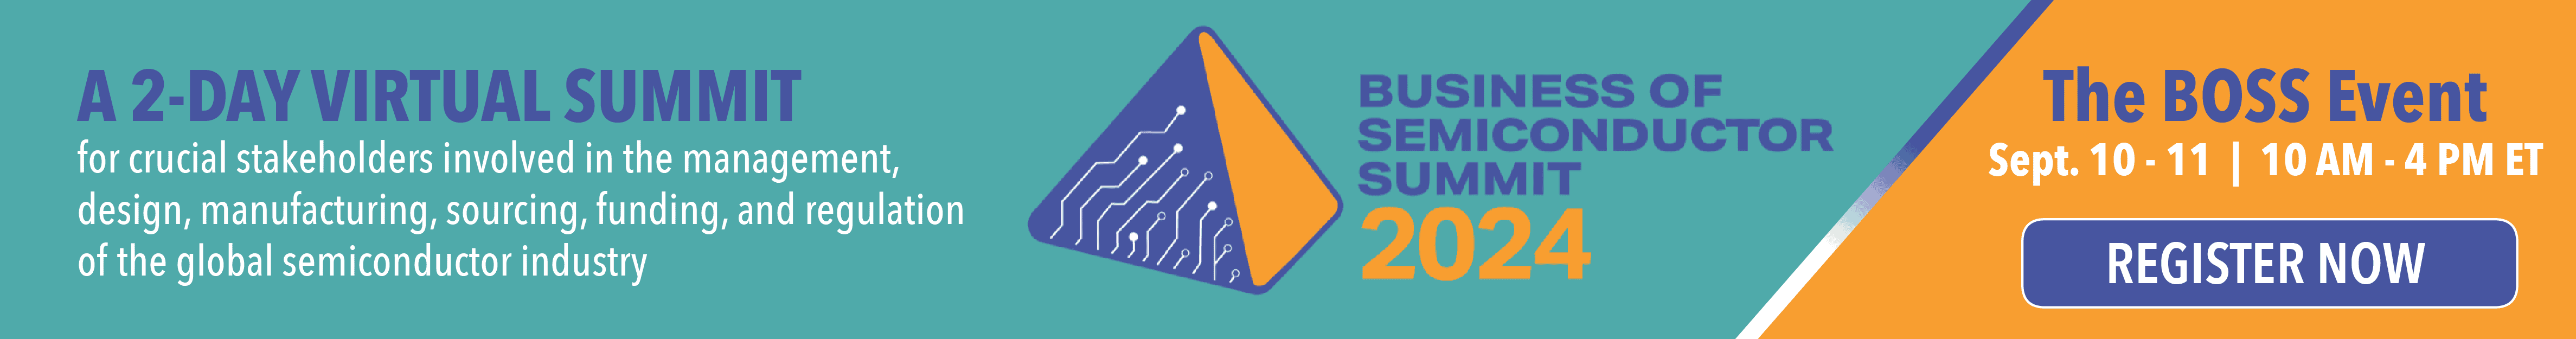 Business of Semiconductor Summit - Tackling Semiconductor Business Challenges and Opportunities with a World in Transition